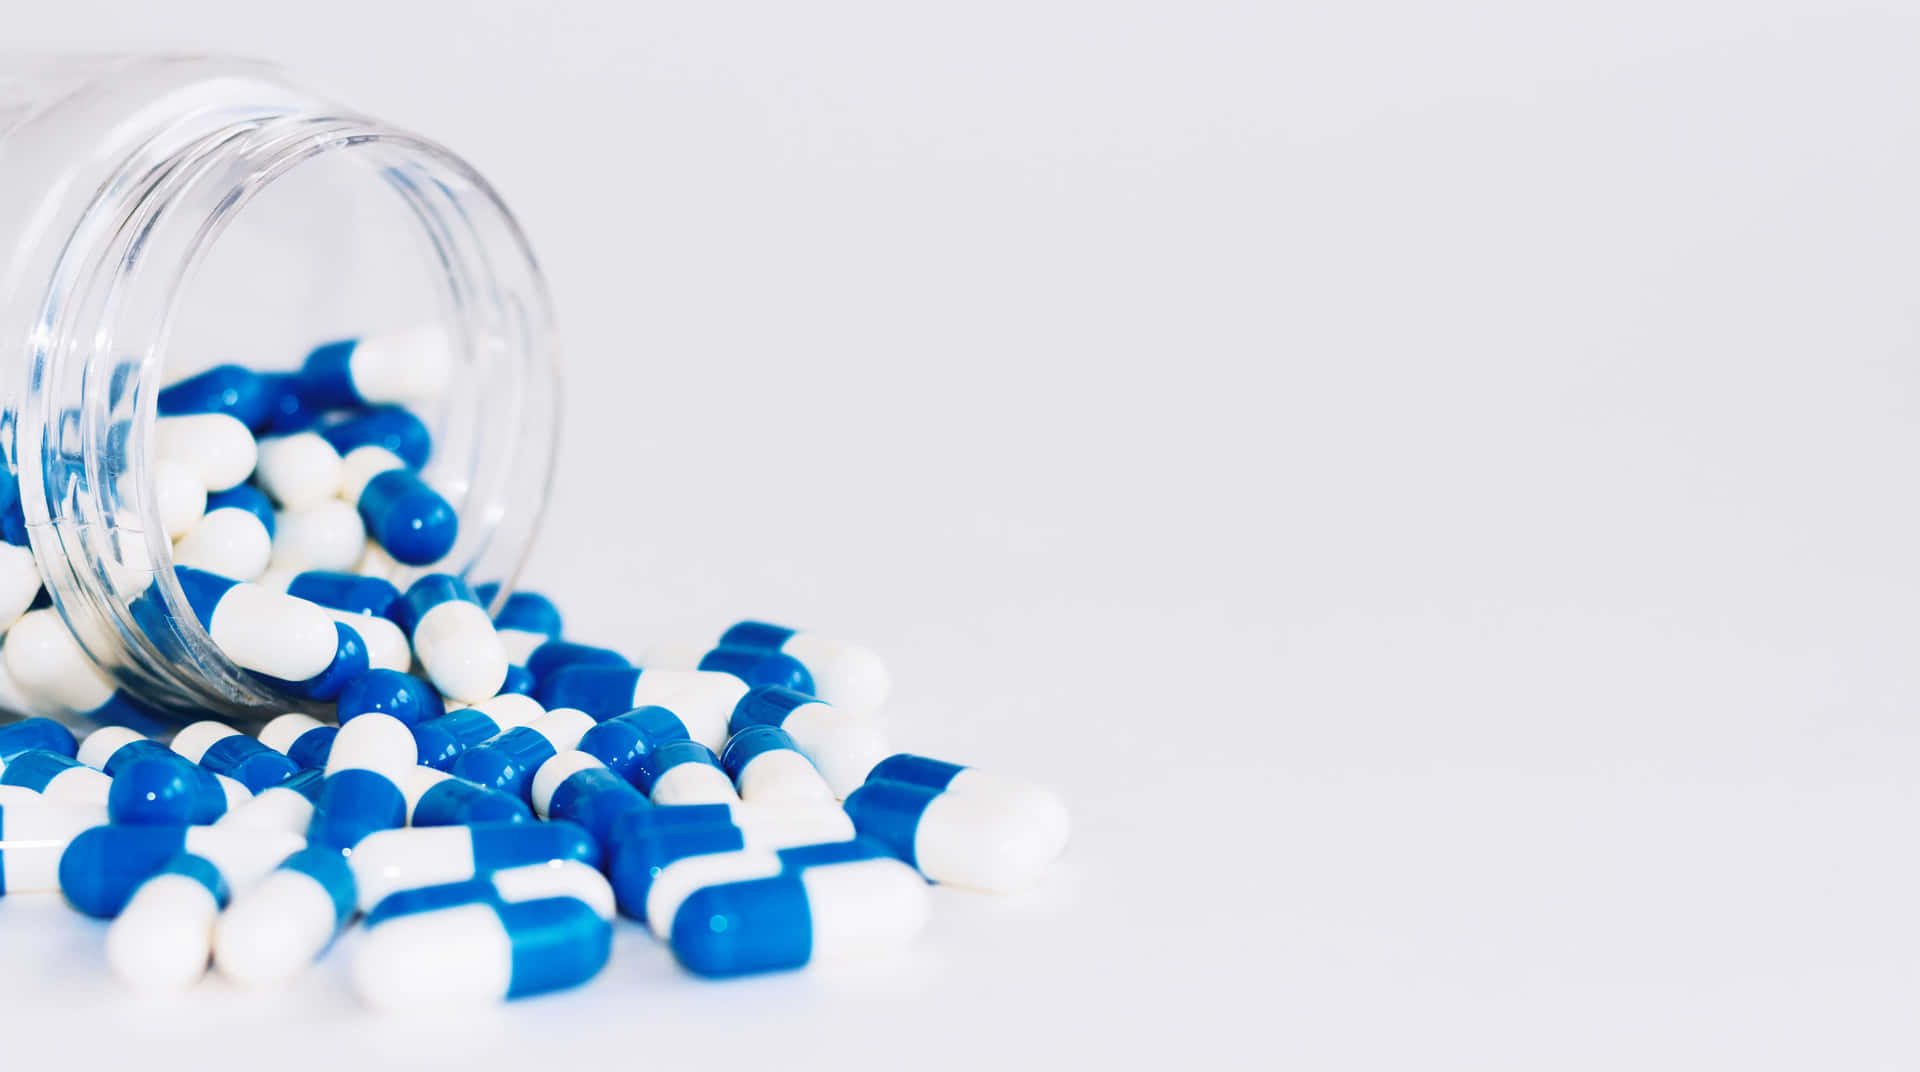 A Glass Jar With Blue And White Pills